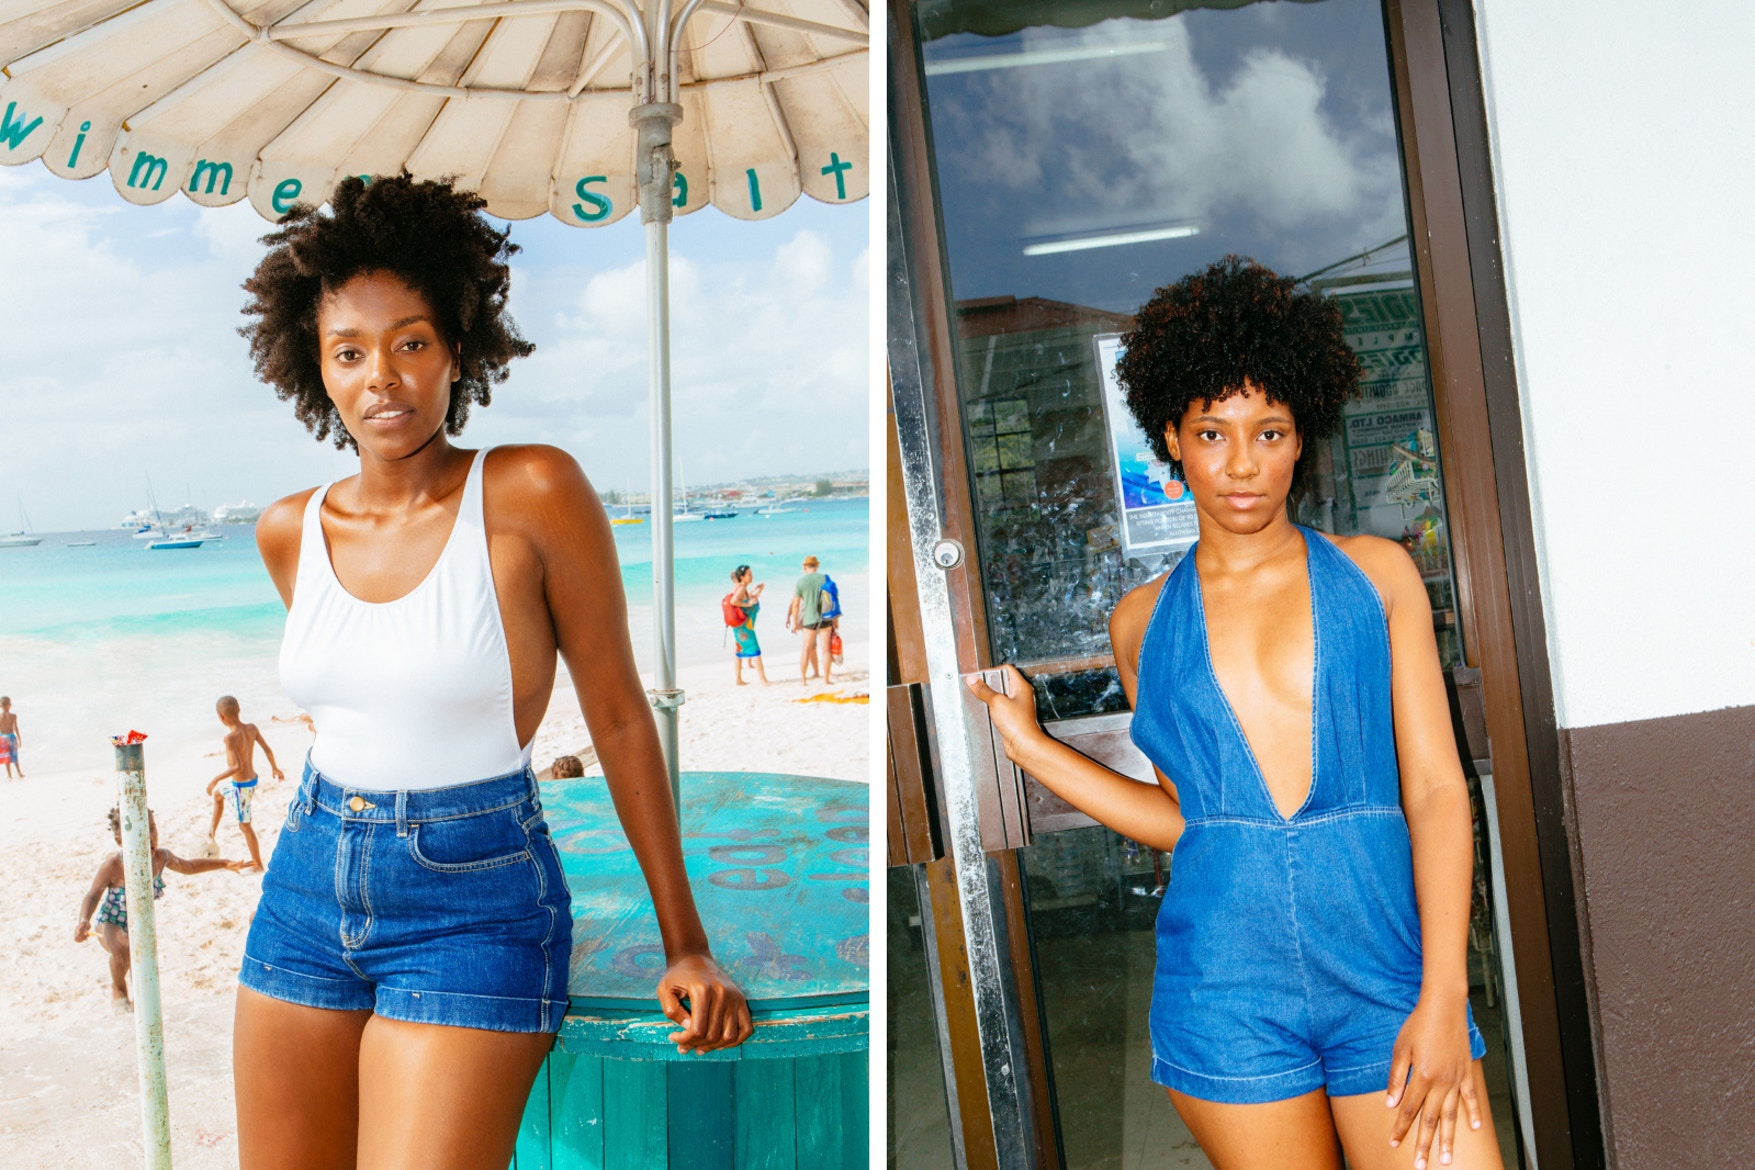 american apparel re launches with back to basics campaign